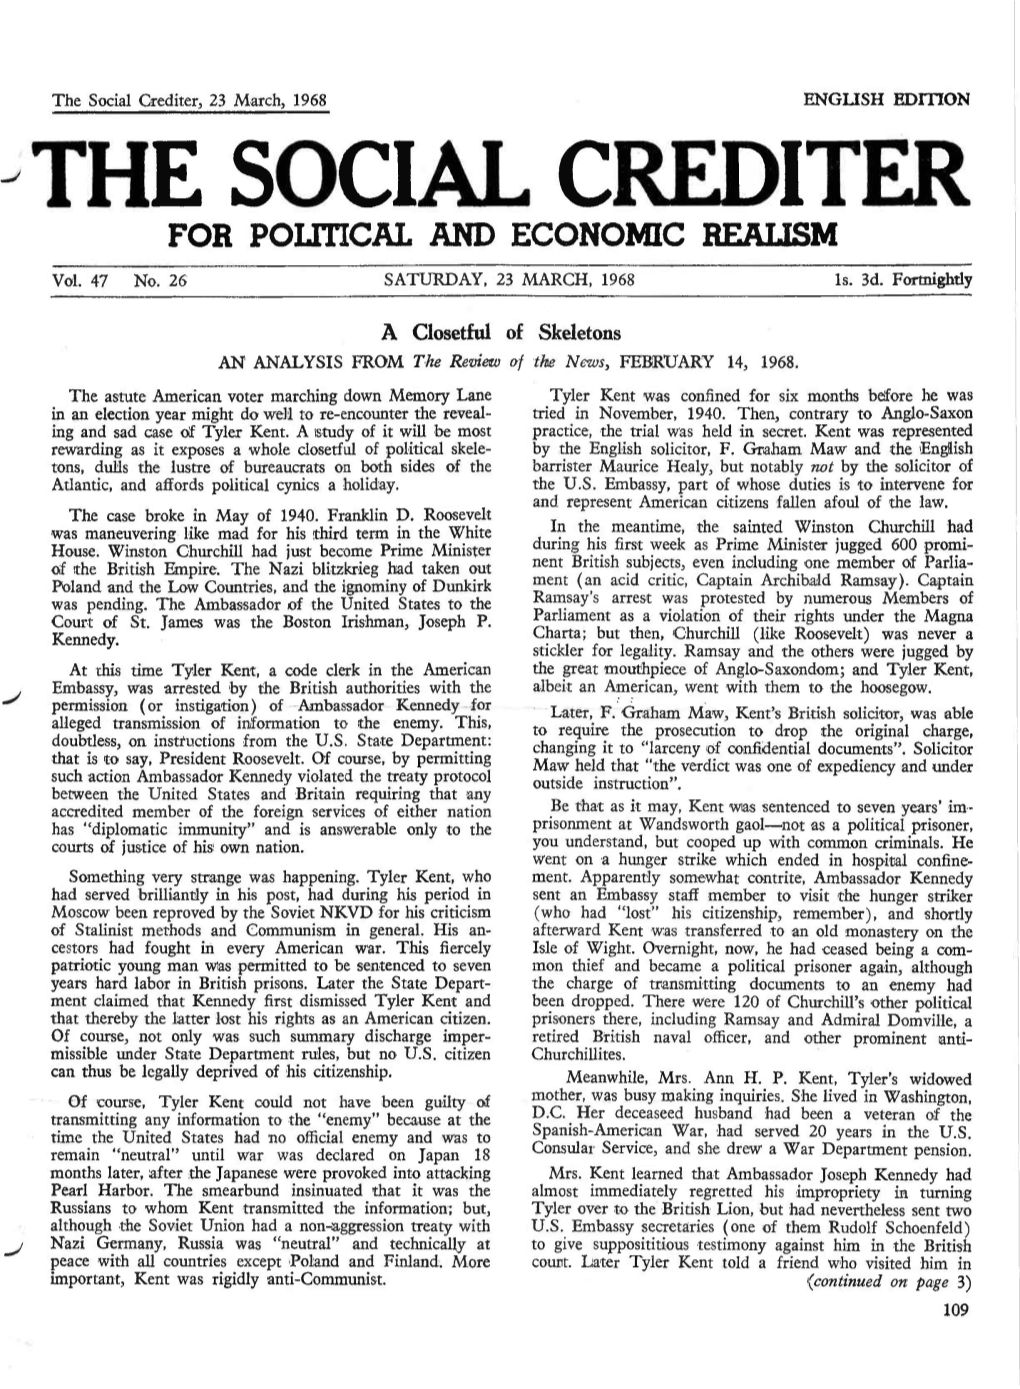 The Social Crediter for Poutical and Economic Beaijsm